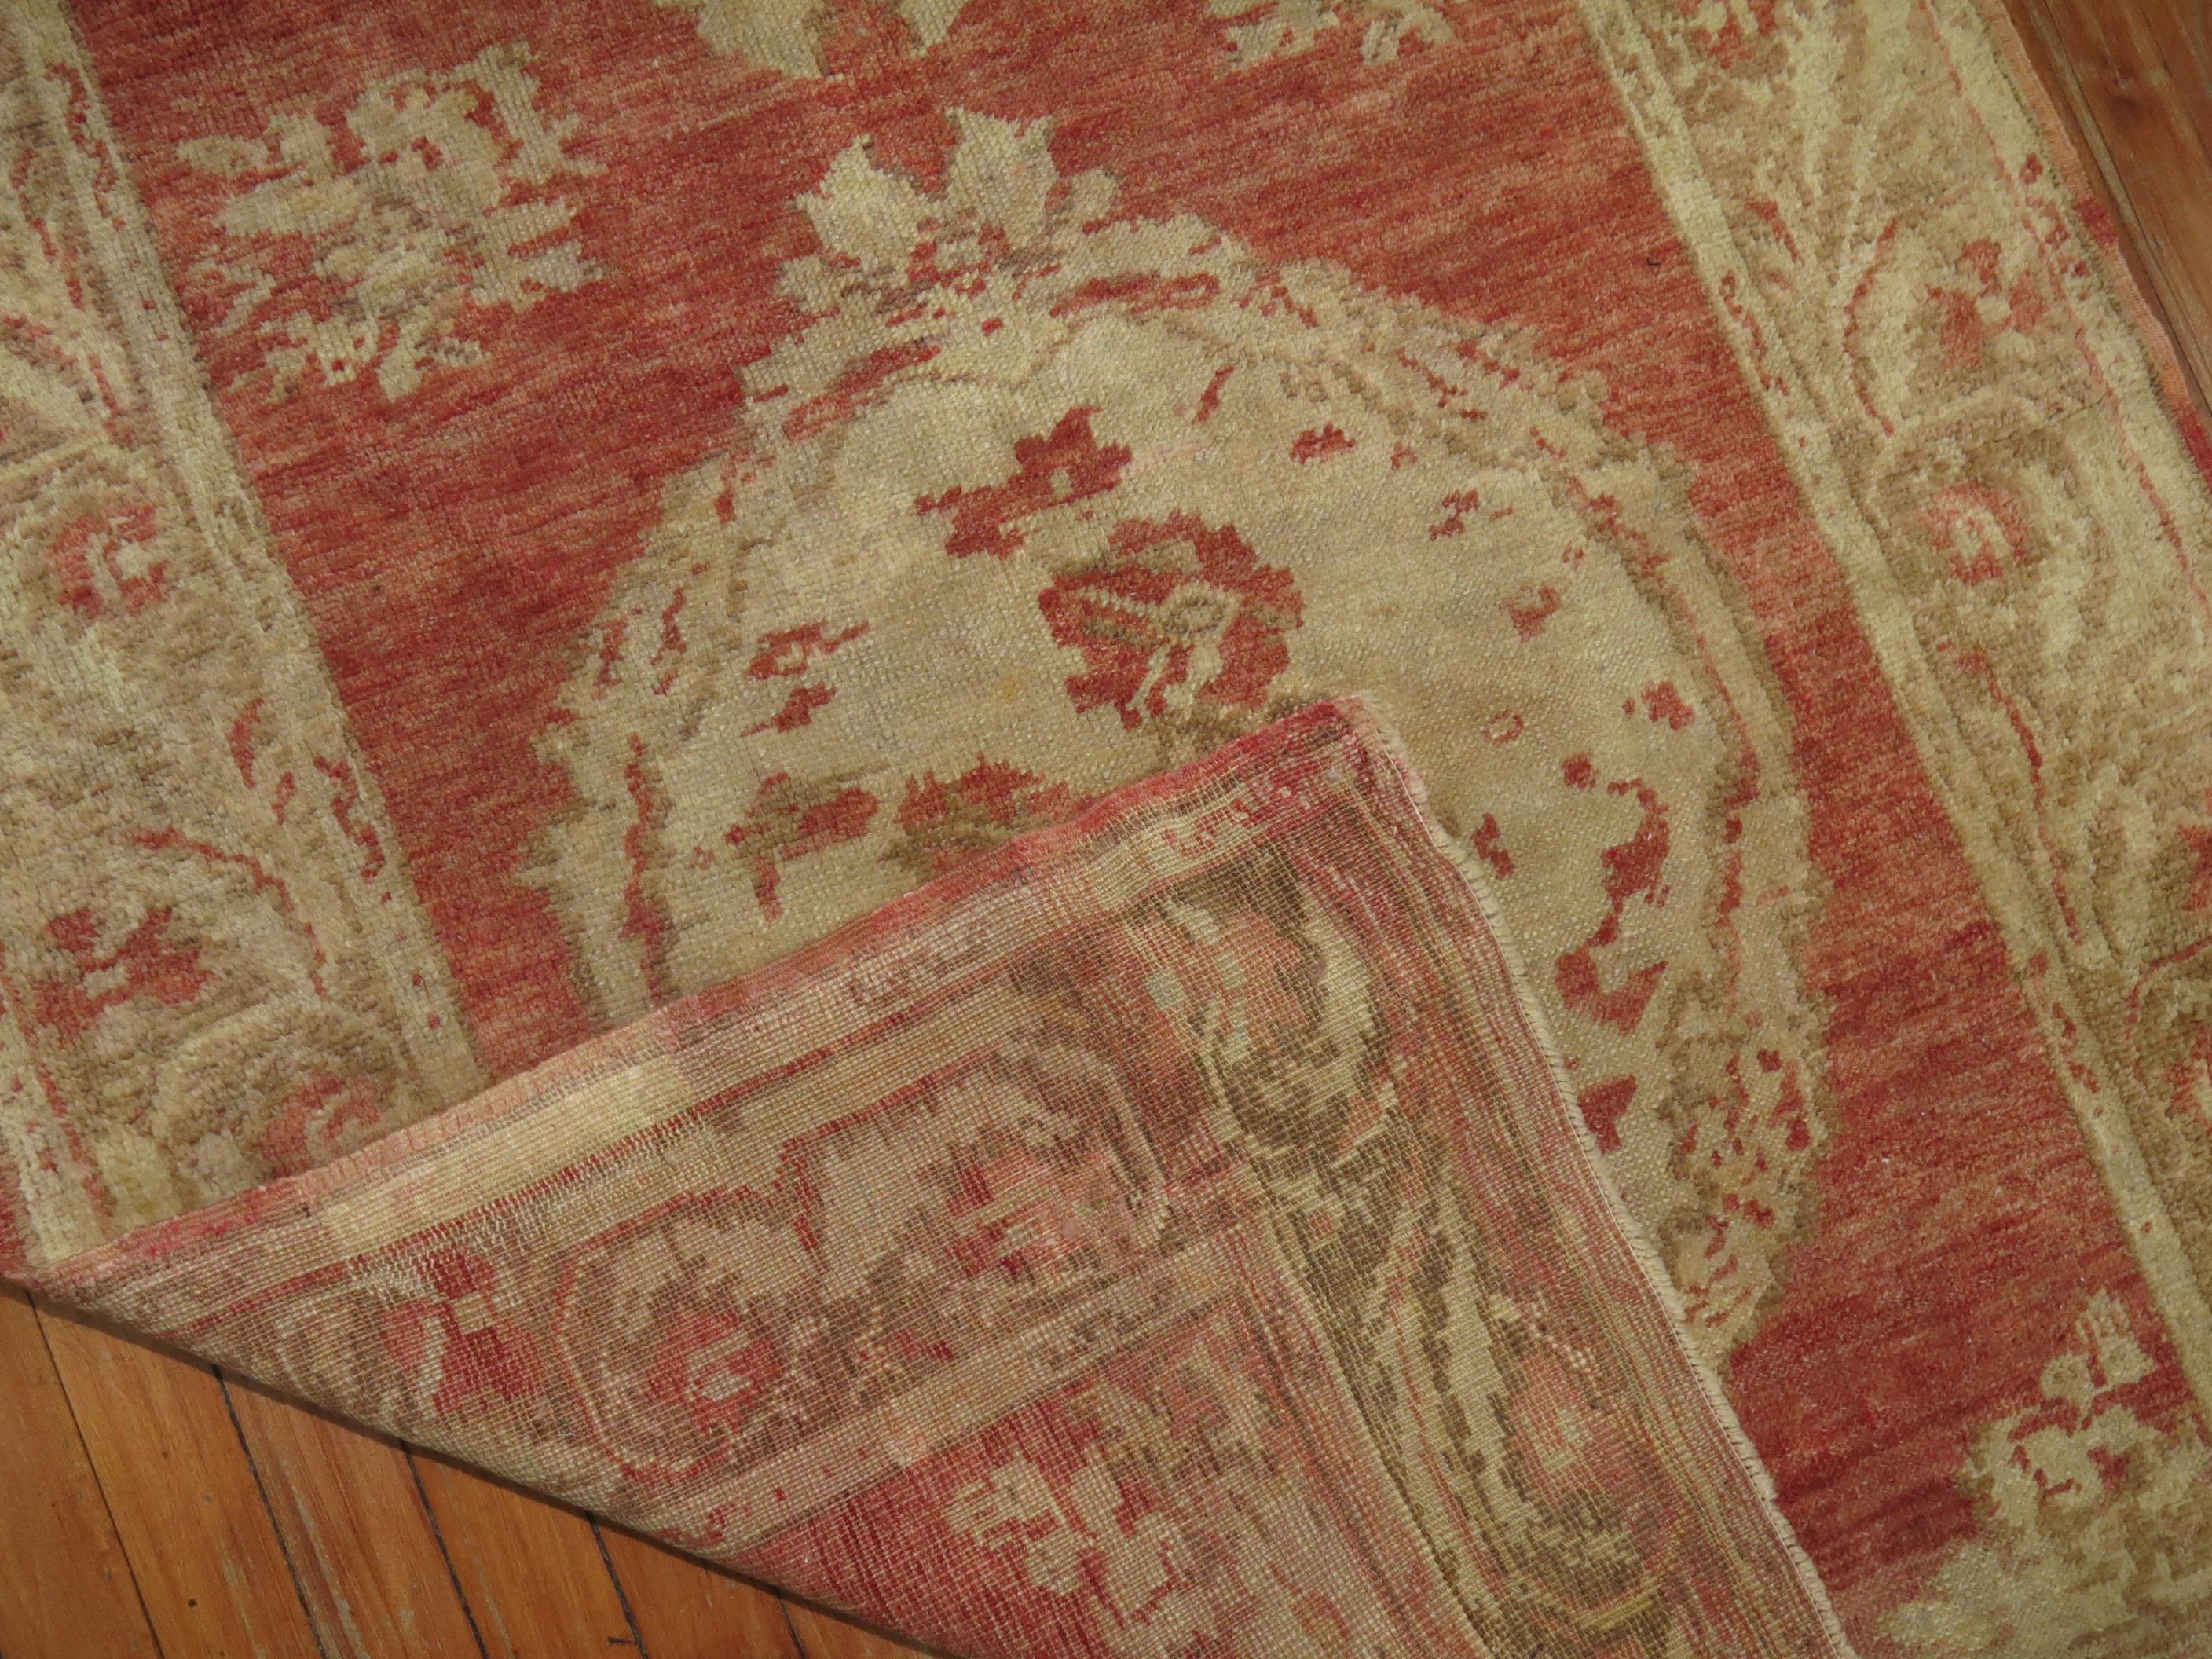 2nd quarter of the 20th century Turkish Runner with a floral design in warm colors

3'5'' x 9'2''